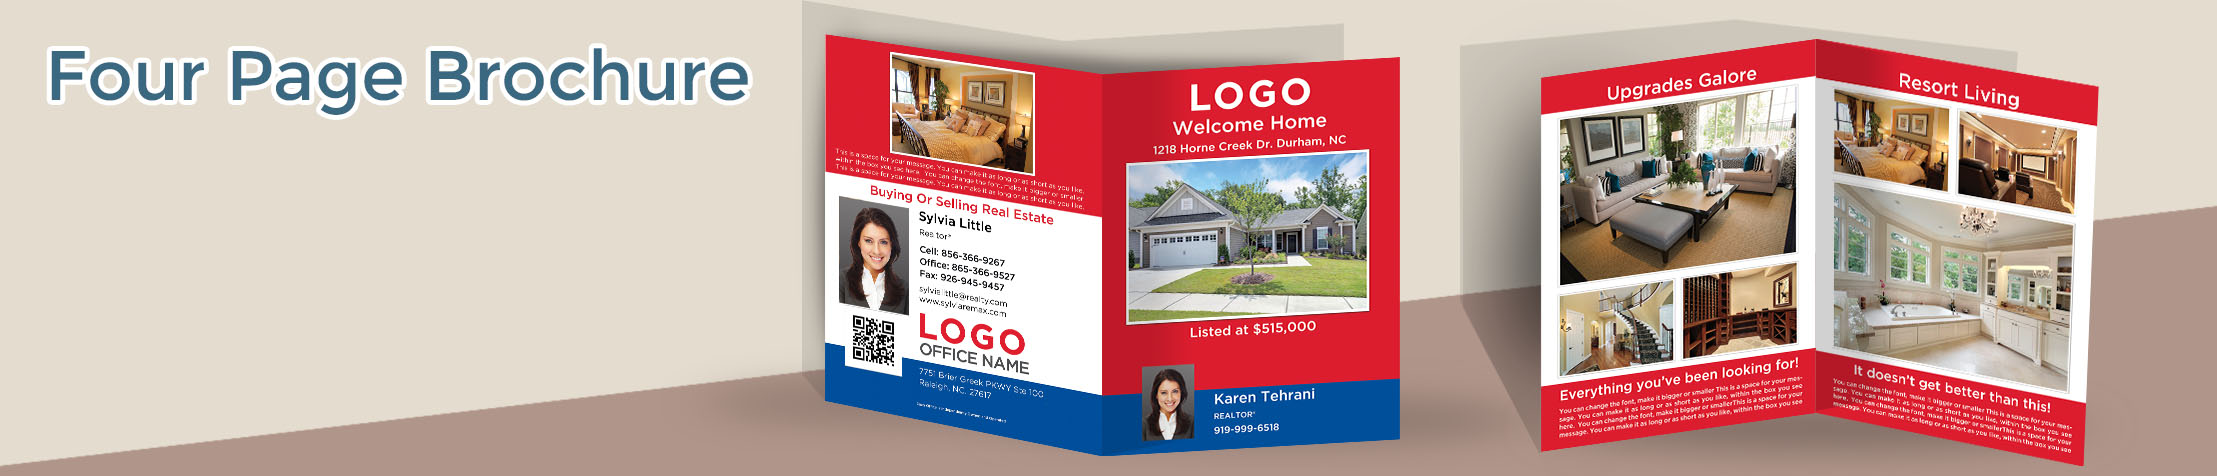 RE/MAX Real Estate Flyers and Brochures - RE/MAX four page brochure templates for open houses and marketing | BestPrintBuy.com